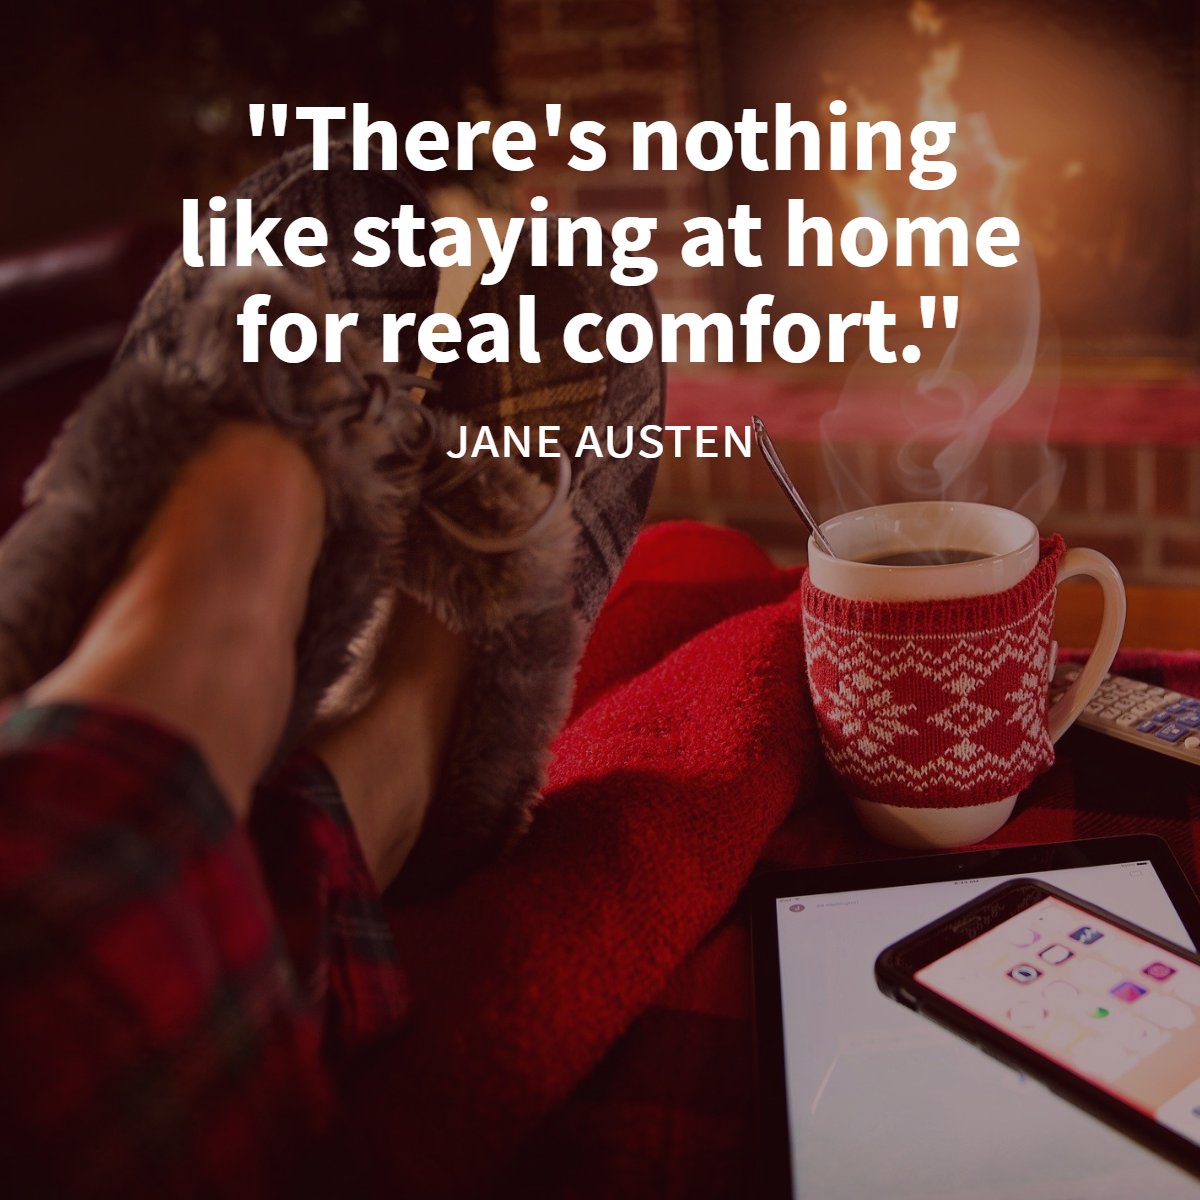 'There's nothing like staying at home for real comfort.' 
― Jane Austen 📖

#quoteoftheday #quotestagram #lifequotes #quotes #homesweethome #janeausten #realestate
 #SouthwestFlorida